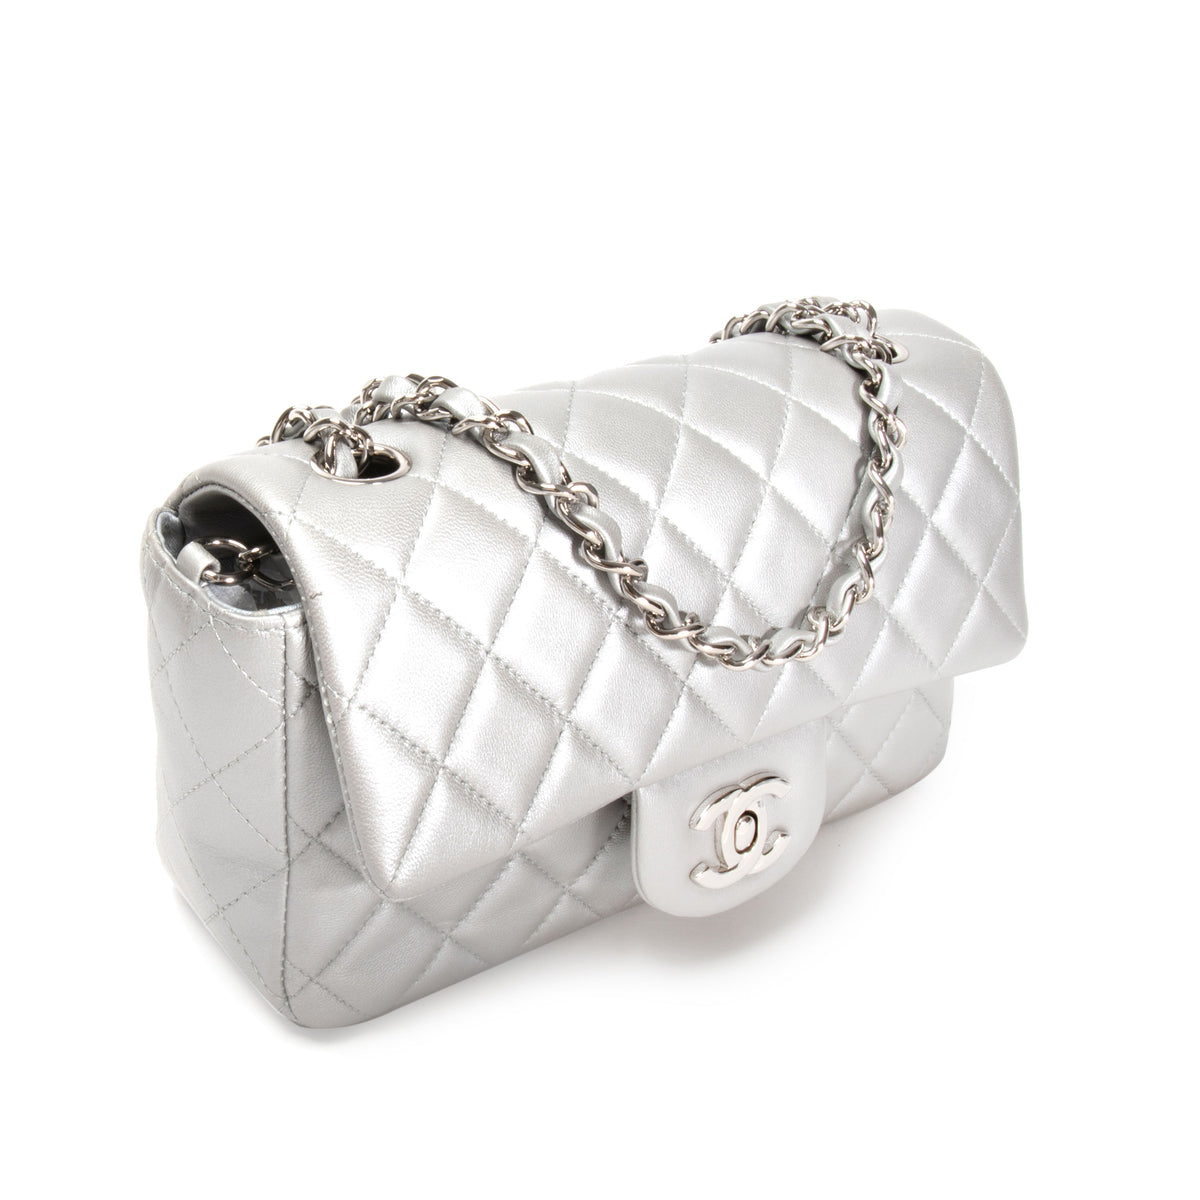 Chanel Silver Quilted Lambskin New Mini Classic Flap Bag by WP